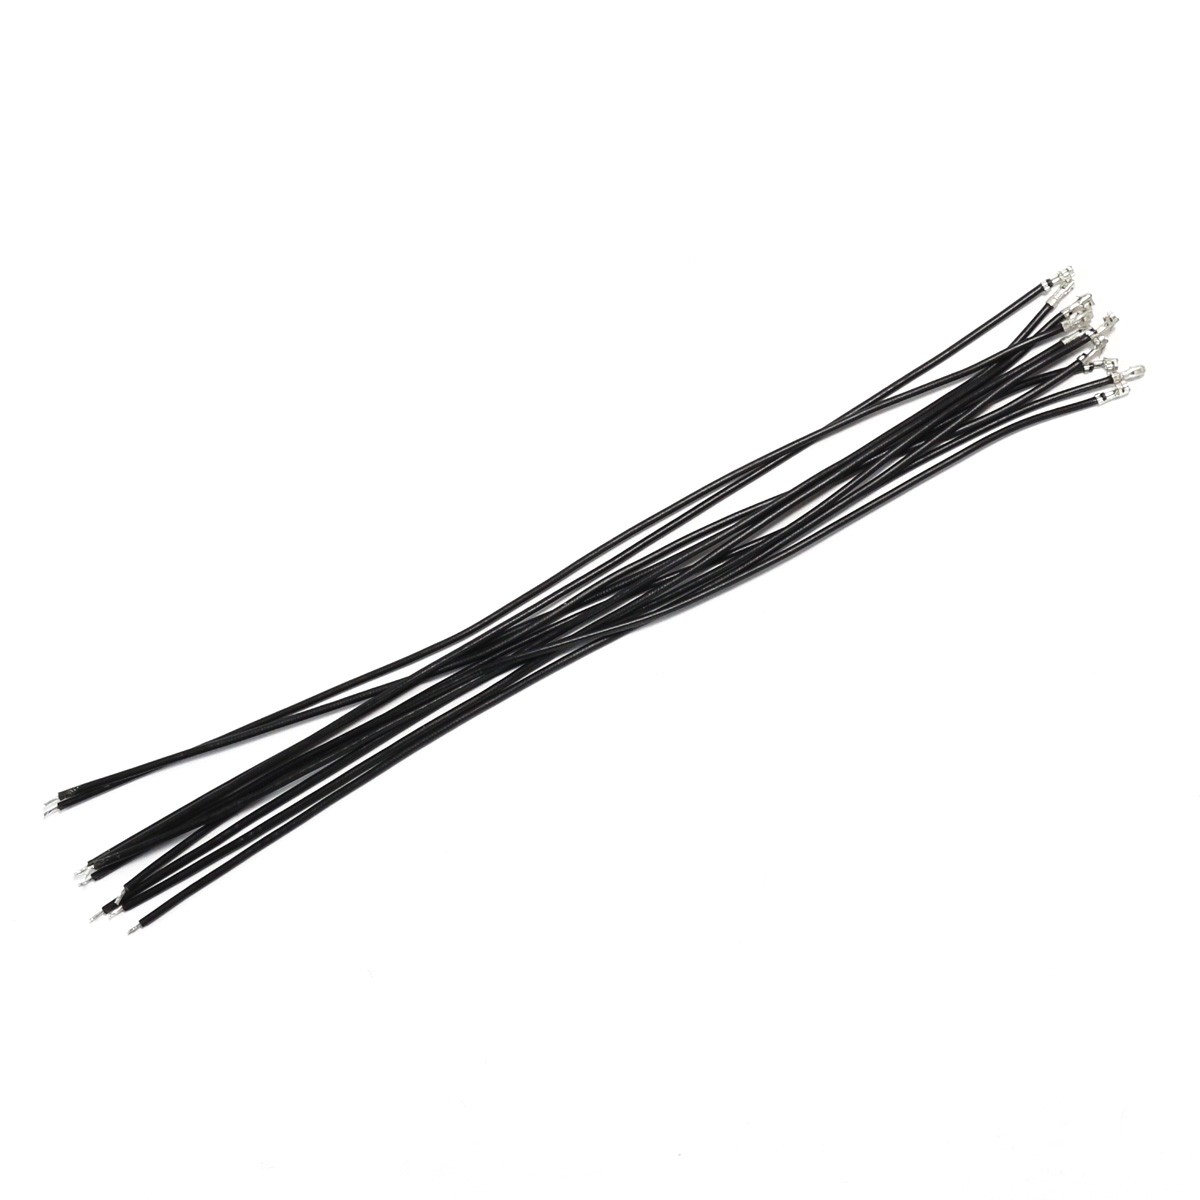 XH 2.54mm Female to Bare wire Cable 1 Poles No Casing Black 20cm (x10)